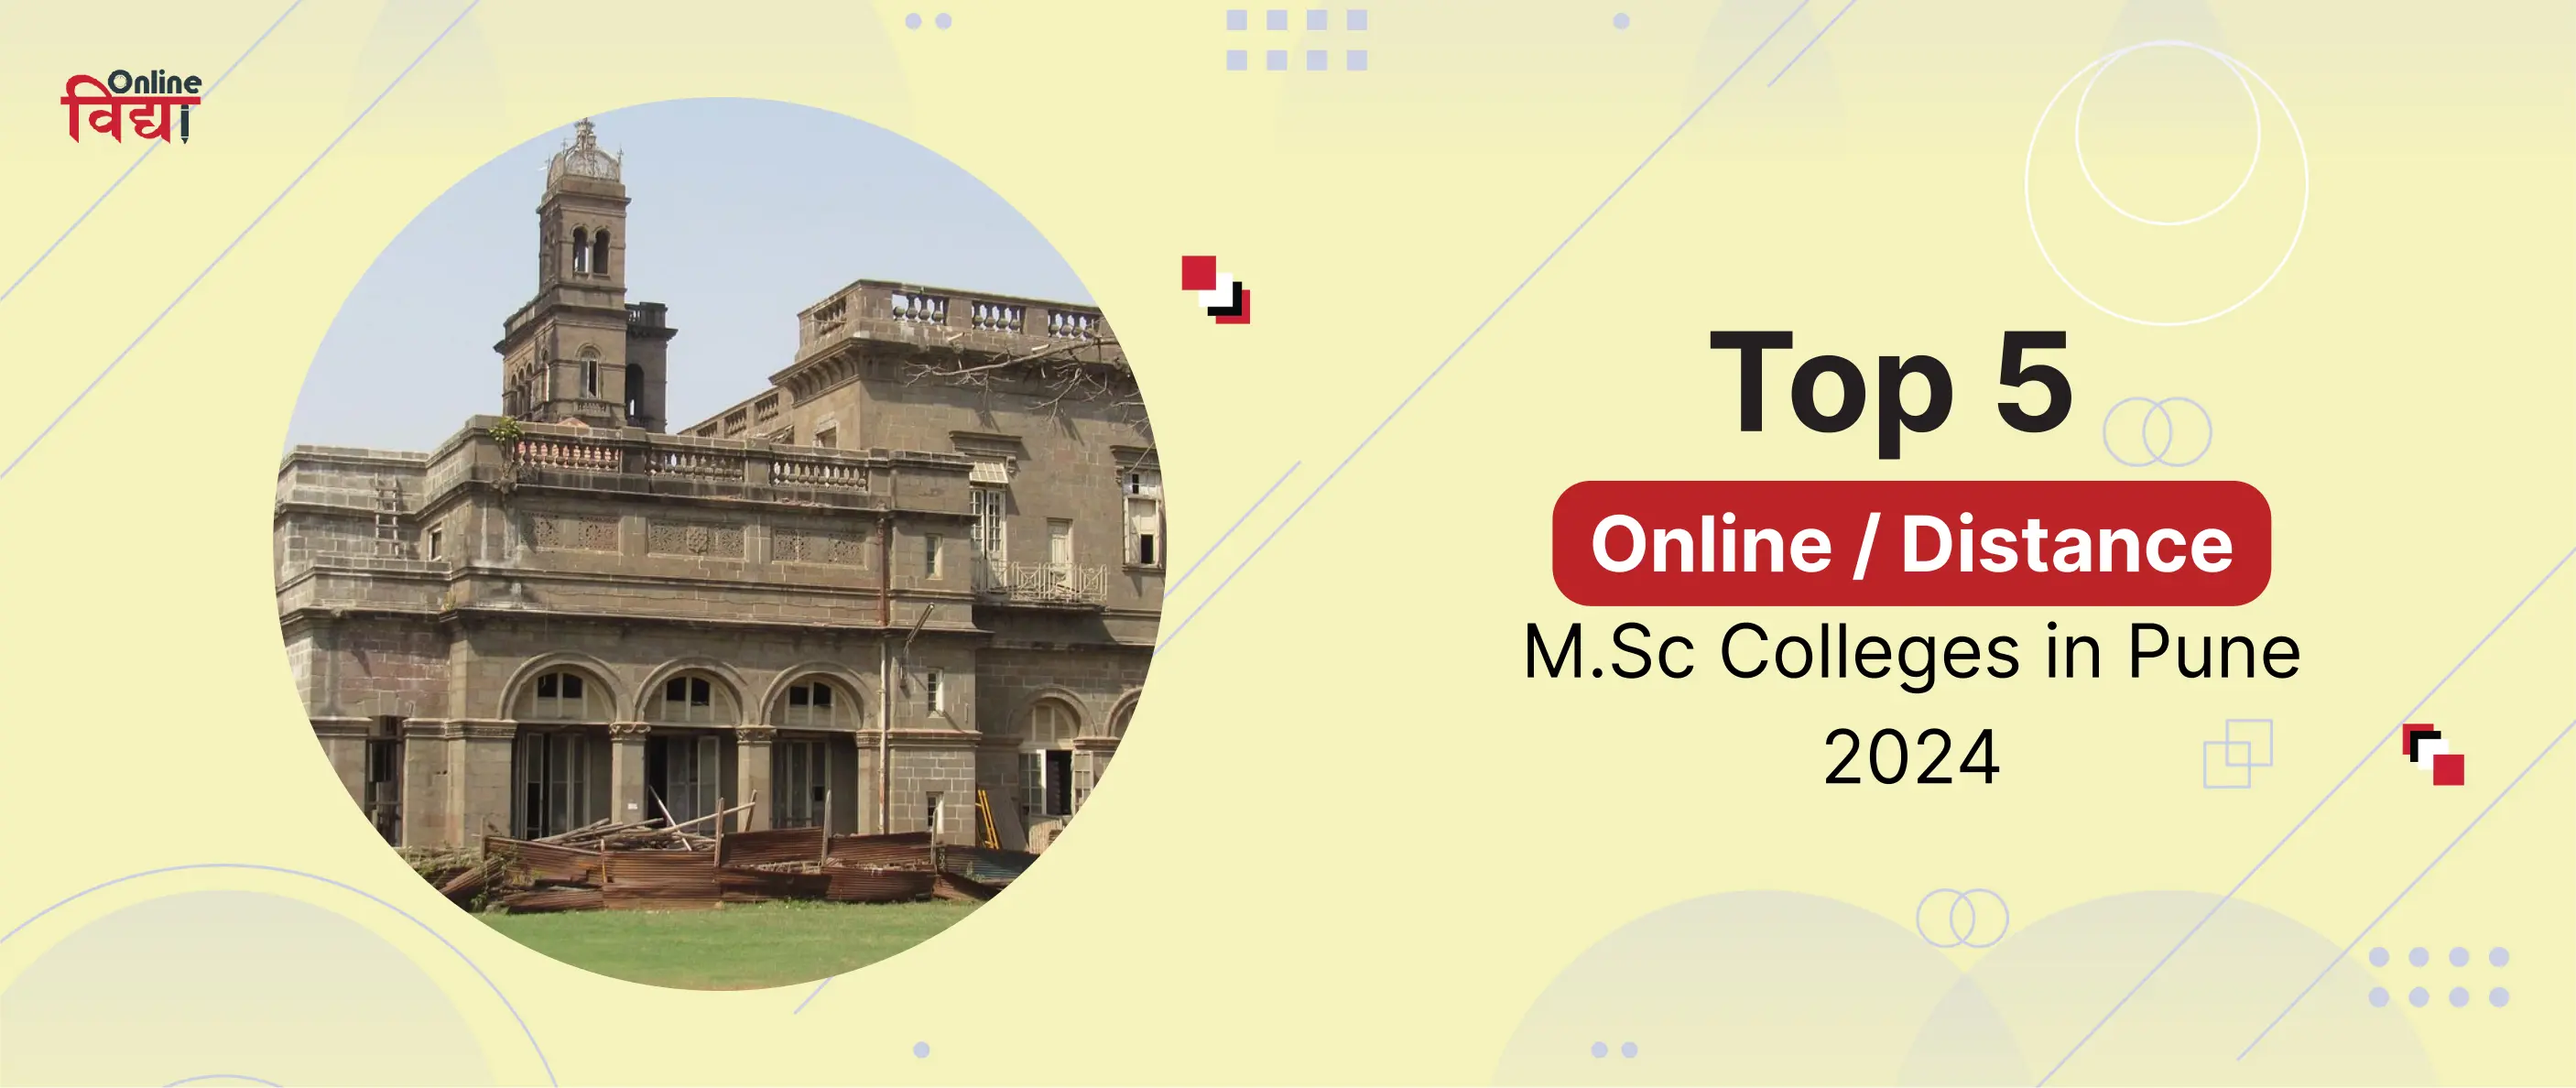 Top 5 Online/Distance M.Sc Colleges in Pune 2024